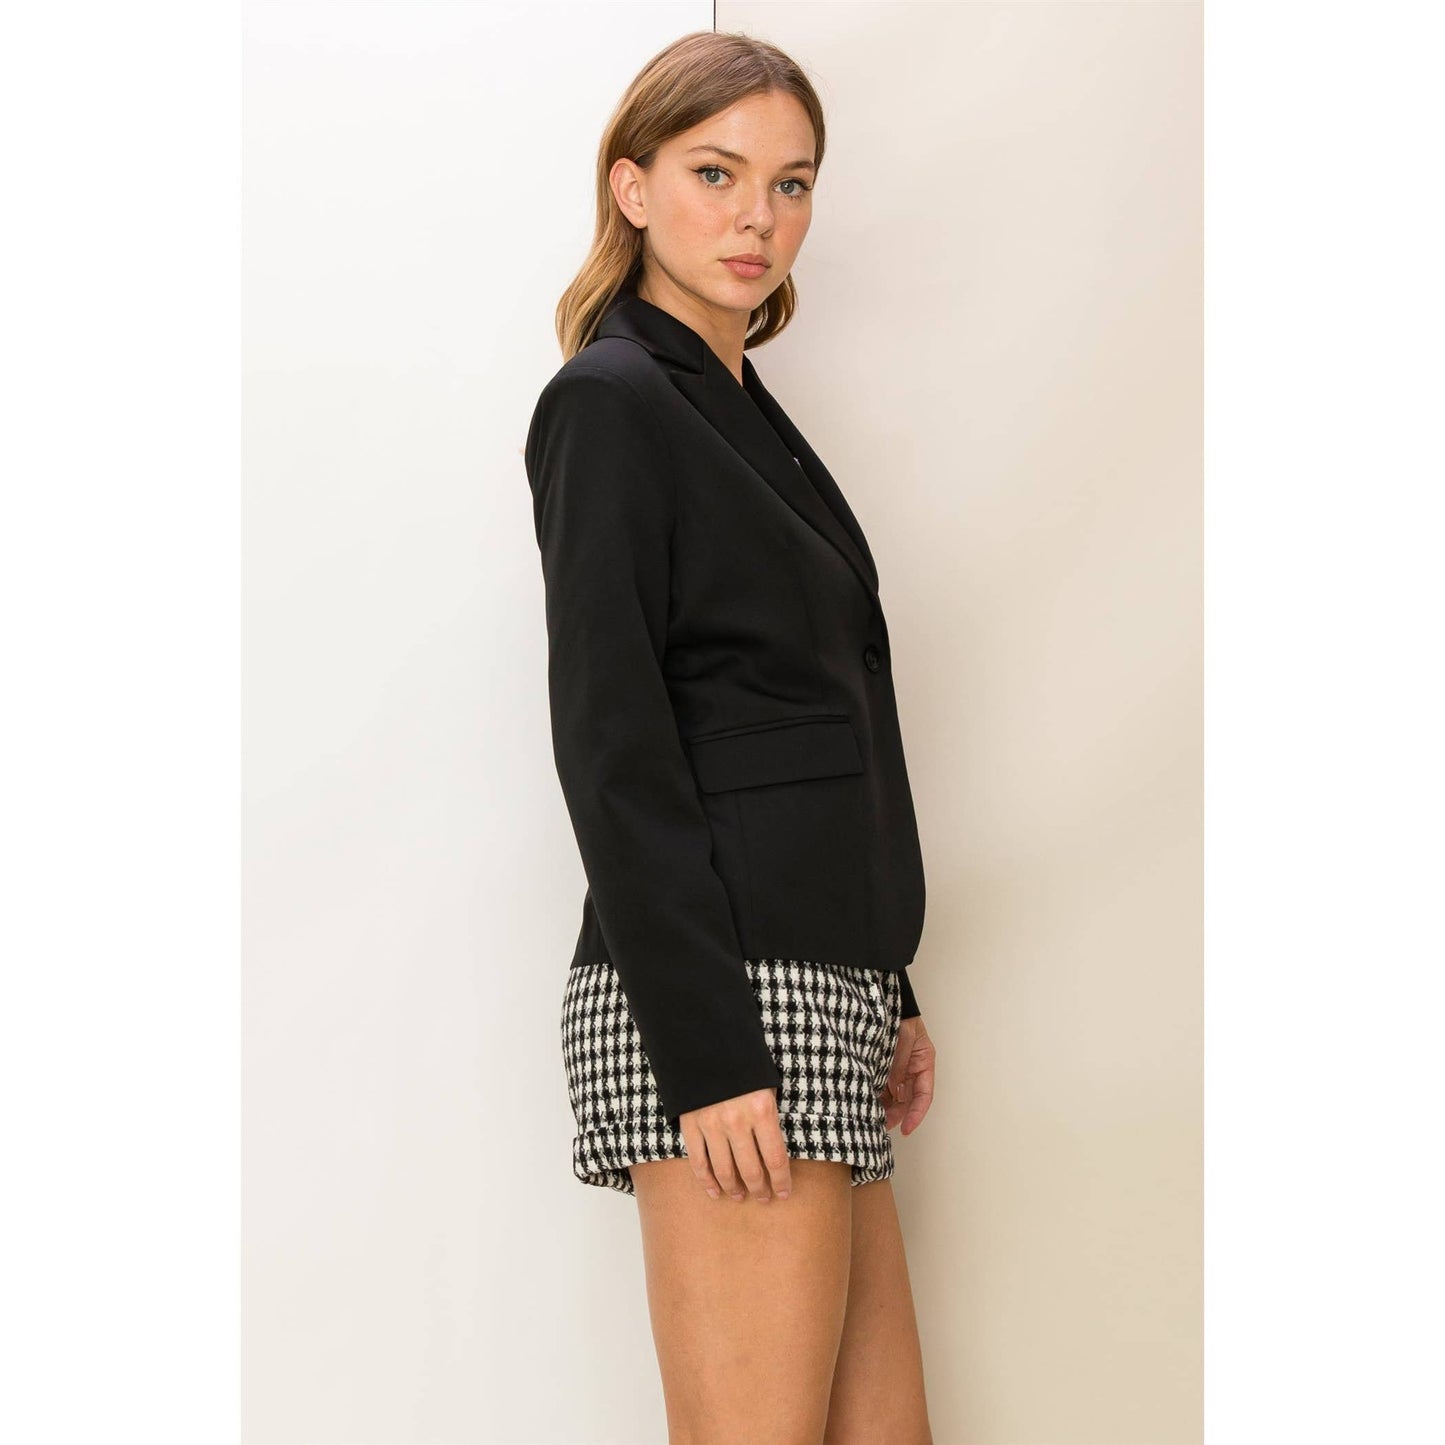 DIAL MY NUMBER SINGLE BUTTON BLAZER: BLACK / S